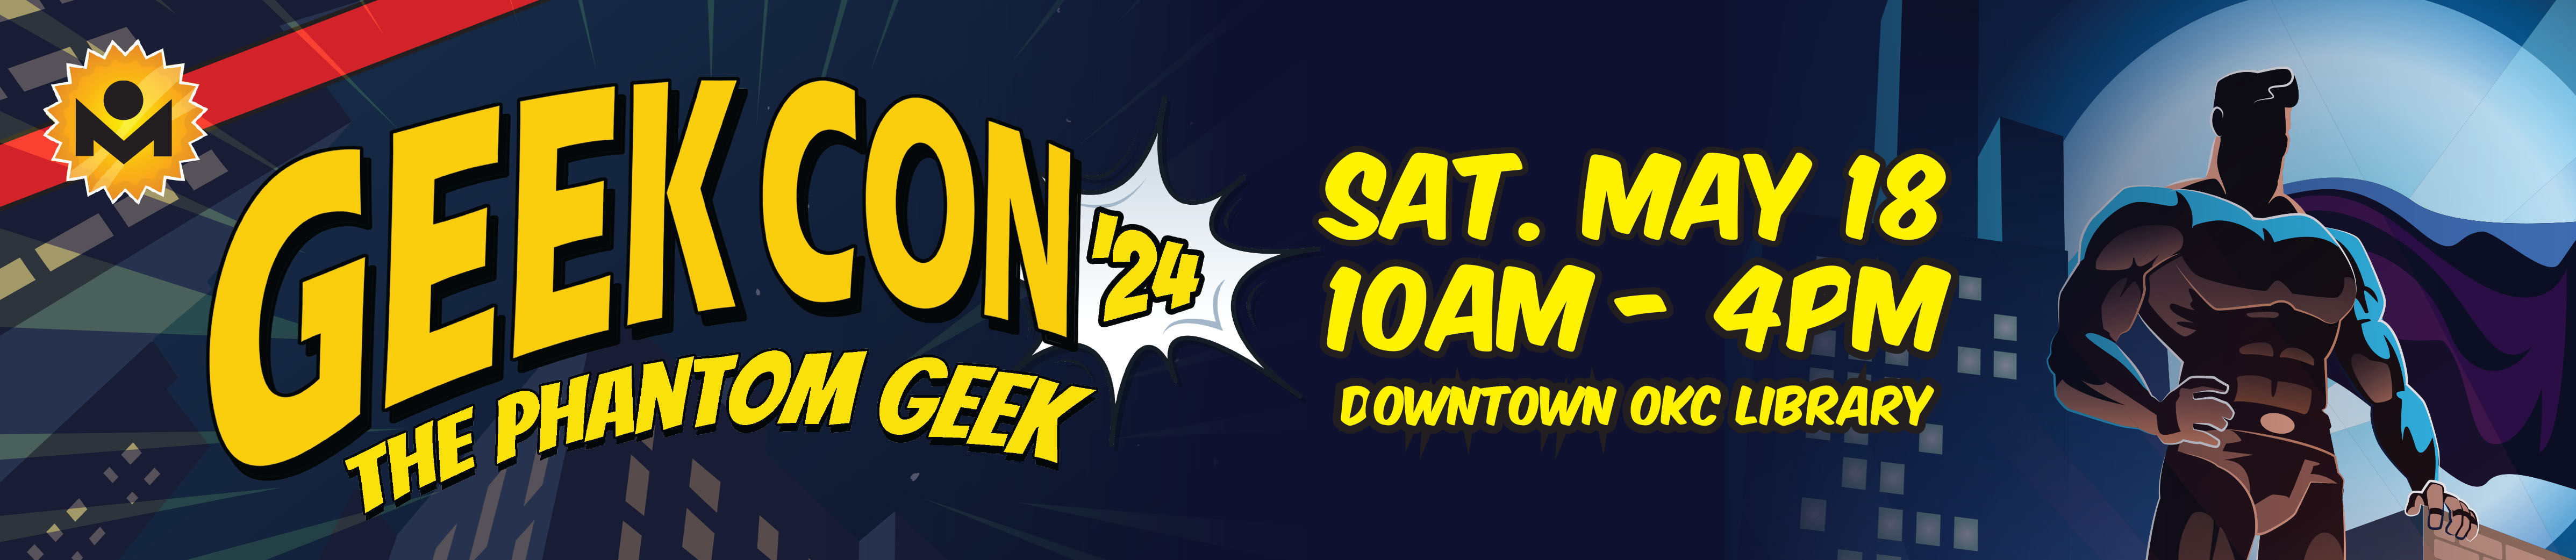 GeekCon '24: The Phantom Geek, Sat. May 18, 10am-4pm, Downtown OKC Library.